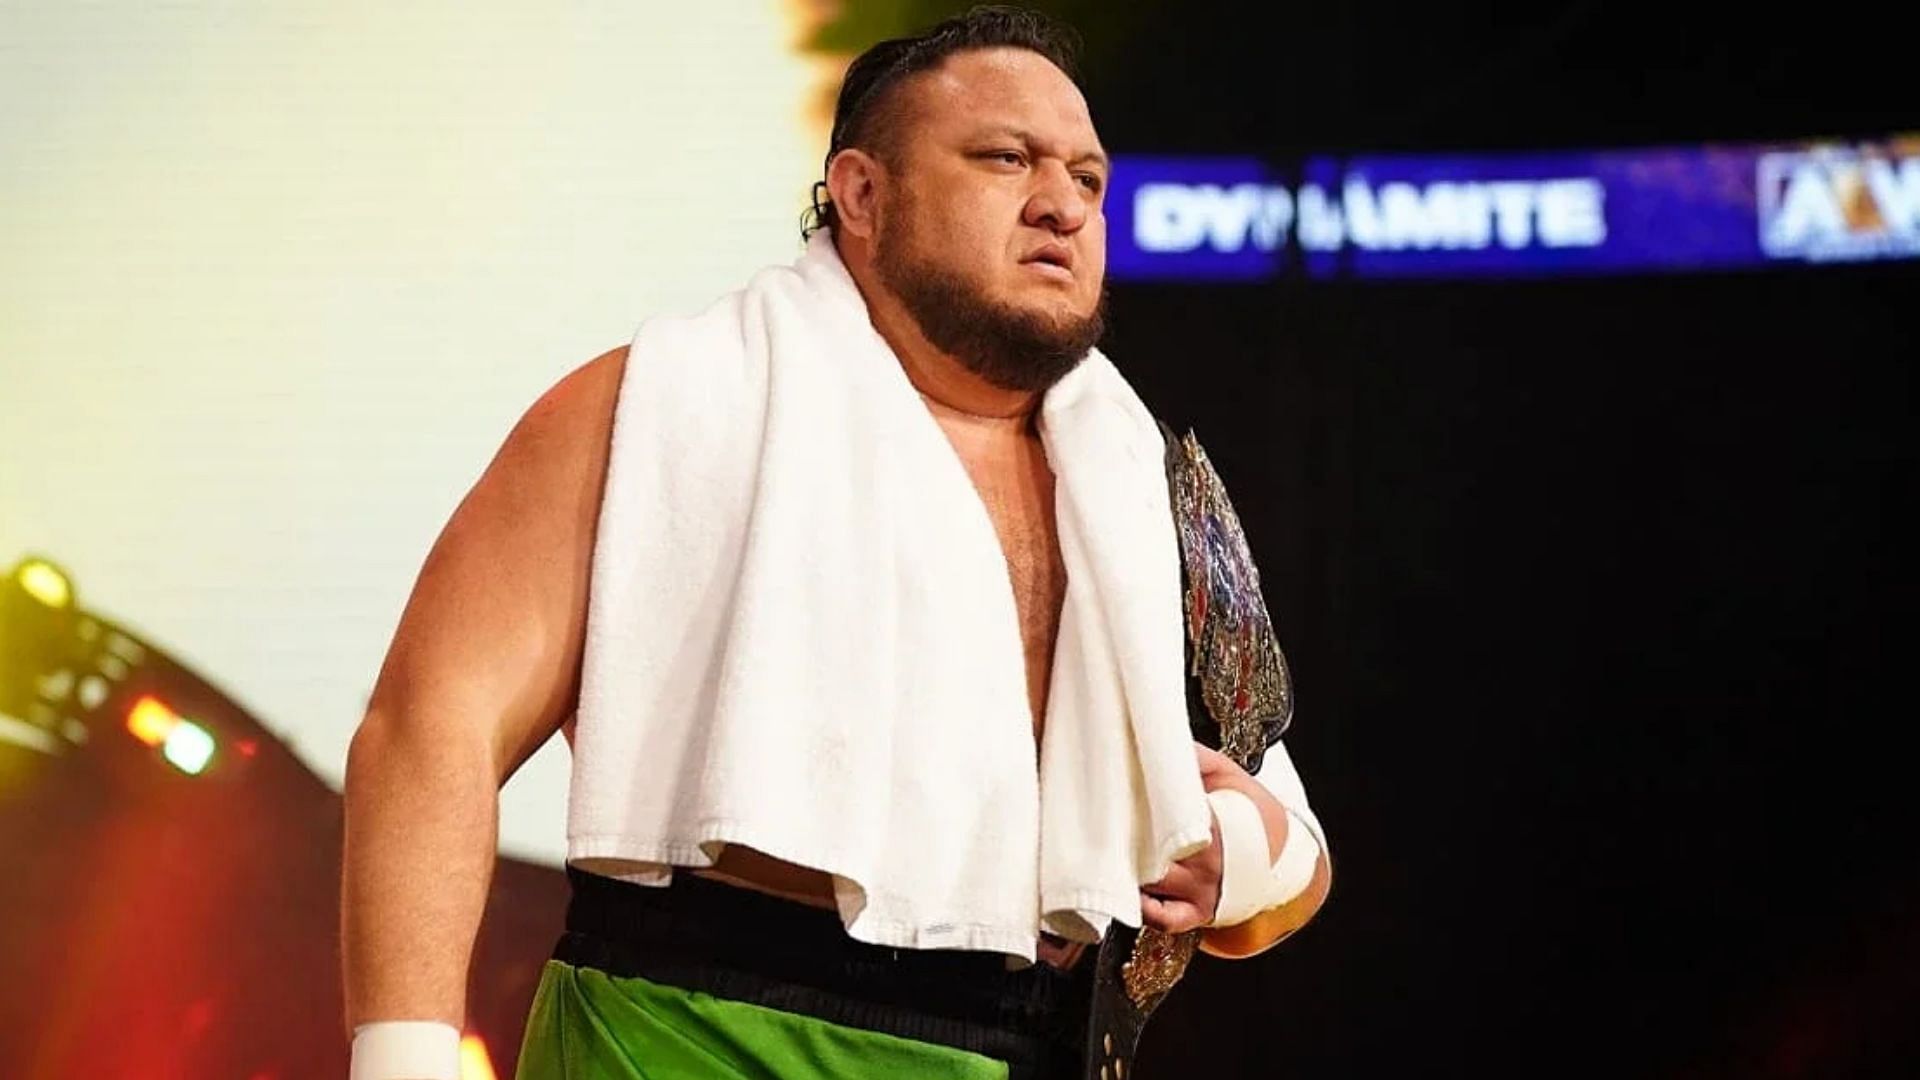 Will Samoa Joe get even with this star sometime soon?